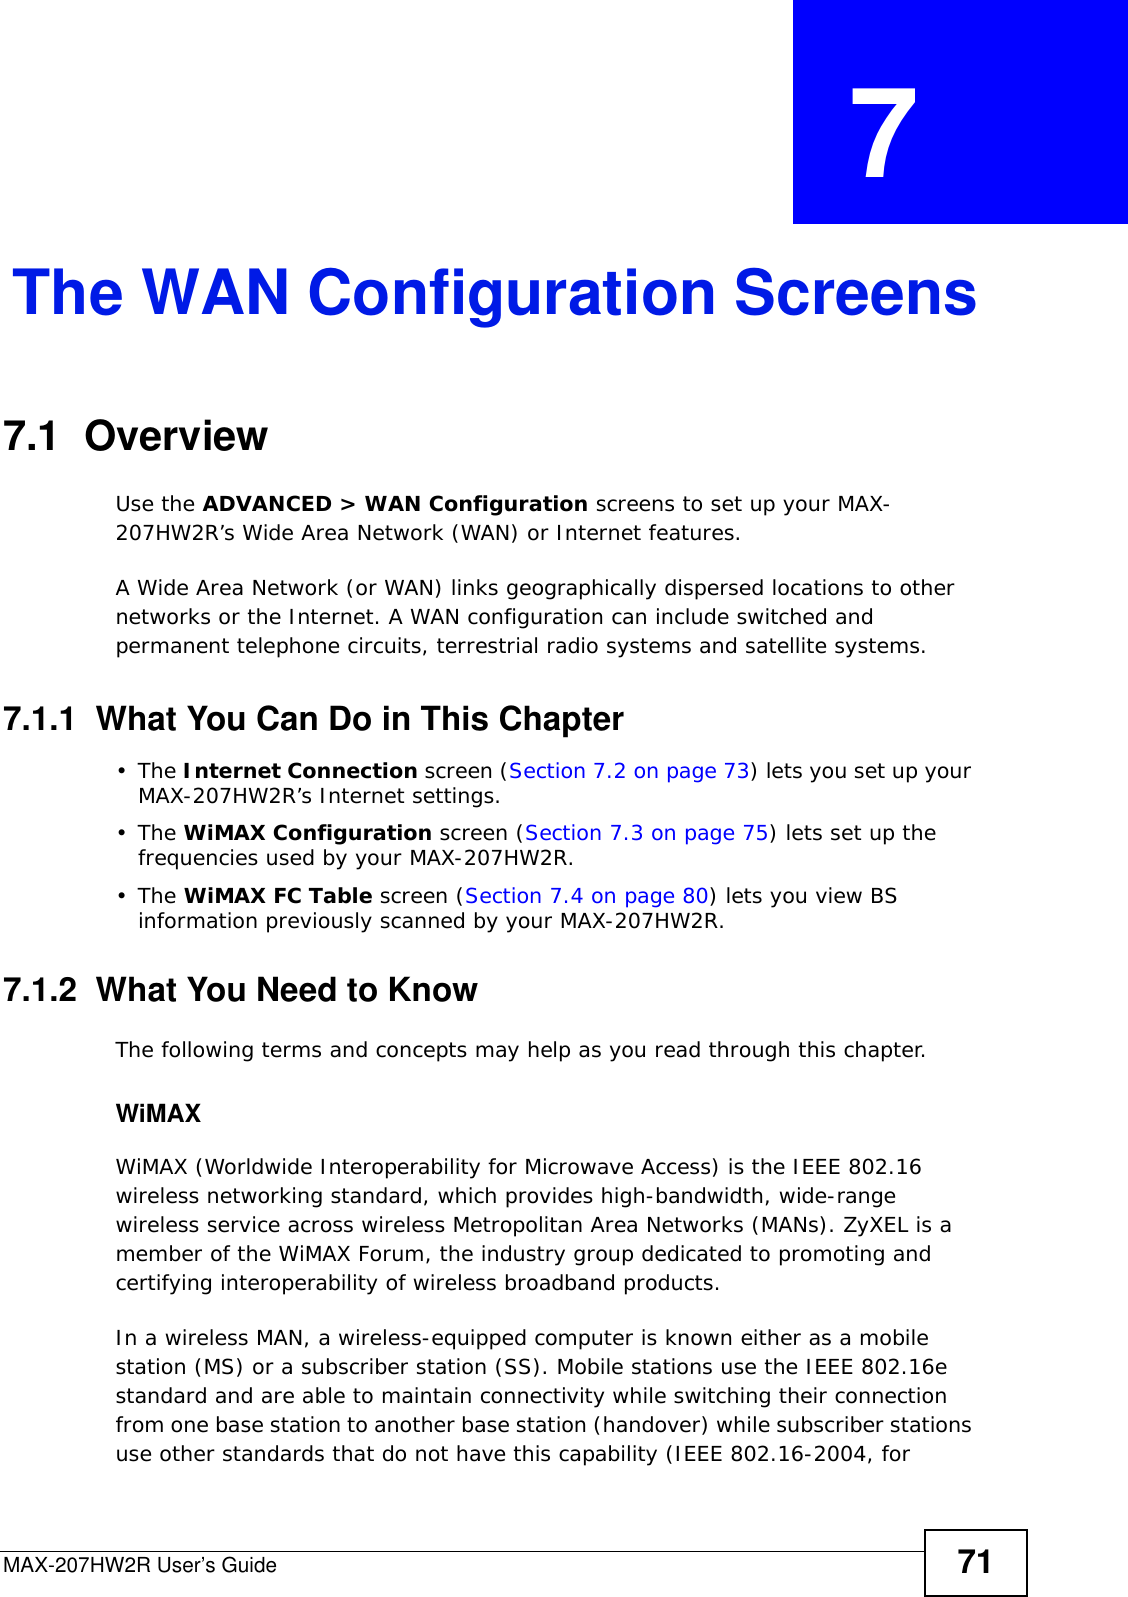 MAX-207HW2R User’s Guide 71CHAPTER  7 The WAN Configuration Screens7.1  Overview Use the ADVANCED &gt; WAN Configuration screens to set up your MAX-207HW2R’s Wide Area Network (WAN) or Internet features.A Wide Area Network (or WAN) links geographically dispersed locations to other networks or the Internet. A WAN configuration can include switched and permanent telephone circuits, terrestrial radio systems and satellite systems.7.1.1  What You Can Do in This Chapter•The Internet Connection screen (Section 7.2 on page 73) lets you set up your MAX-207HW2R’s Internet settings.•The WiMAX Configuration screen (Section 7.3 on page 75) lets set up the frequencies used by your MAX-207HW2R.•The WiMAX FC Table screen (Section 7.4 on page 80) lets you view BS information previously scanned by your MAX-207HW2R.7.1.2  What You Need to KnowThe following terms and concepts may help as you read through this chapter.WiMAX WiMAX (Worldwide Interoperability for Microwave Access) is the IEEE 802.16 wireless networking standard, which provides high-bandwidth, wide-range wireless service across wireless Metropolitan Area Networks (MANs). ZyXEL is a member of the WiMAX Forum, the industry group dedicated to promoting and certifying interoperability of wireless broadband products.In a wireless MAN, a wireless-equipped computer is known either as a mobile station (MS) or a subscriber station (SS). Mobile stations use the IEEE 802.16e standard and are able to maintain connectivity while switching their connection from one base station to another base station (handover) while subscriber stations use other standards that do not have this capability (IEEE 802.16-2004, for 